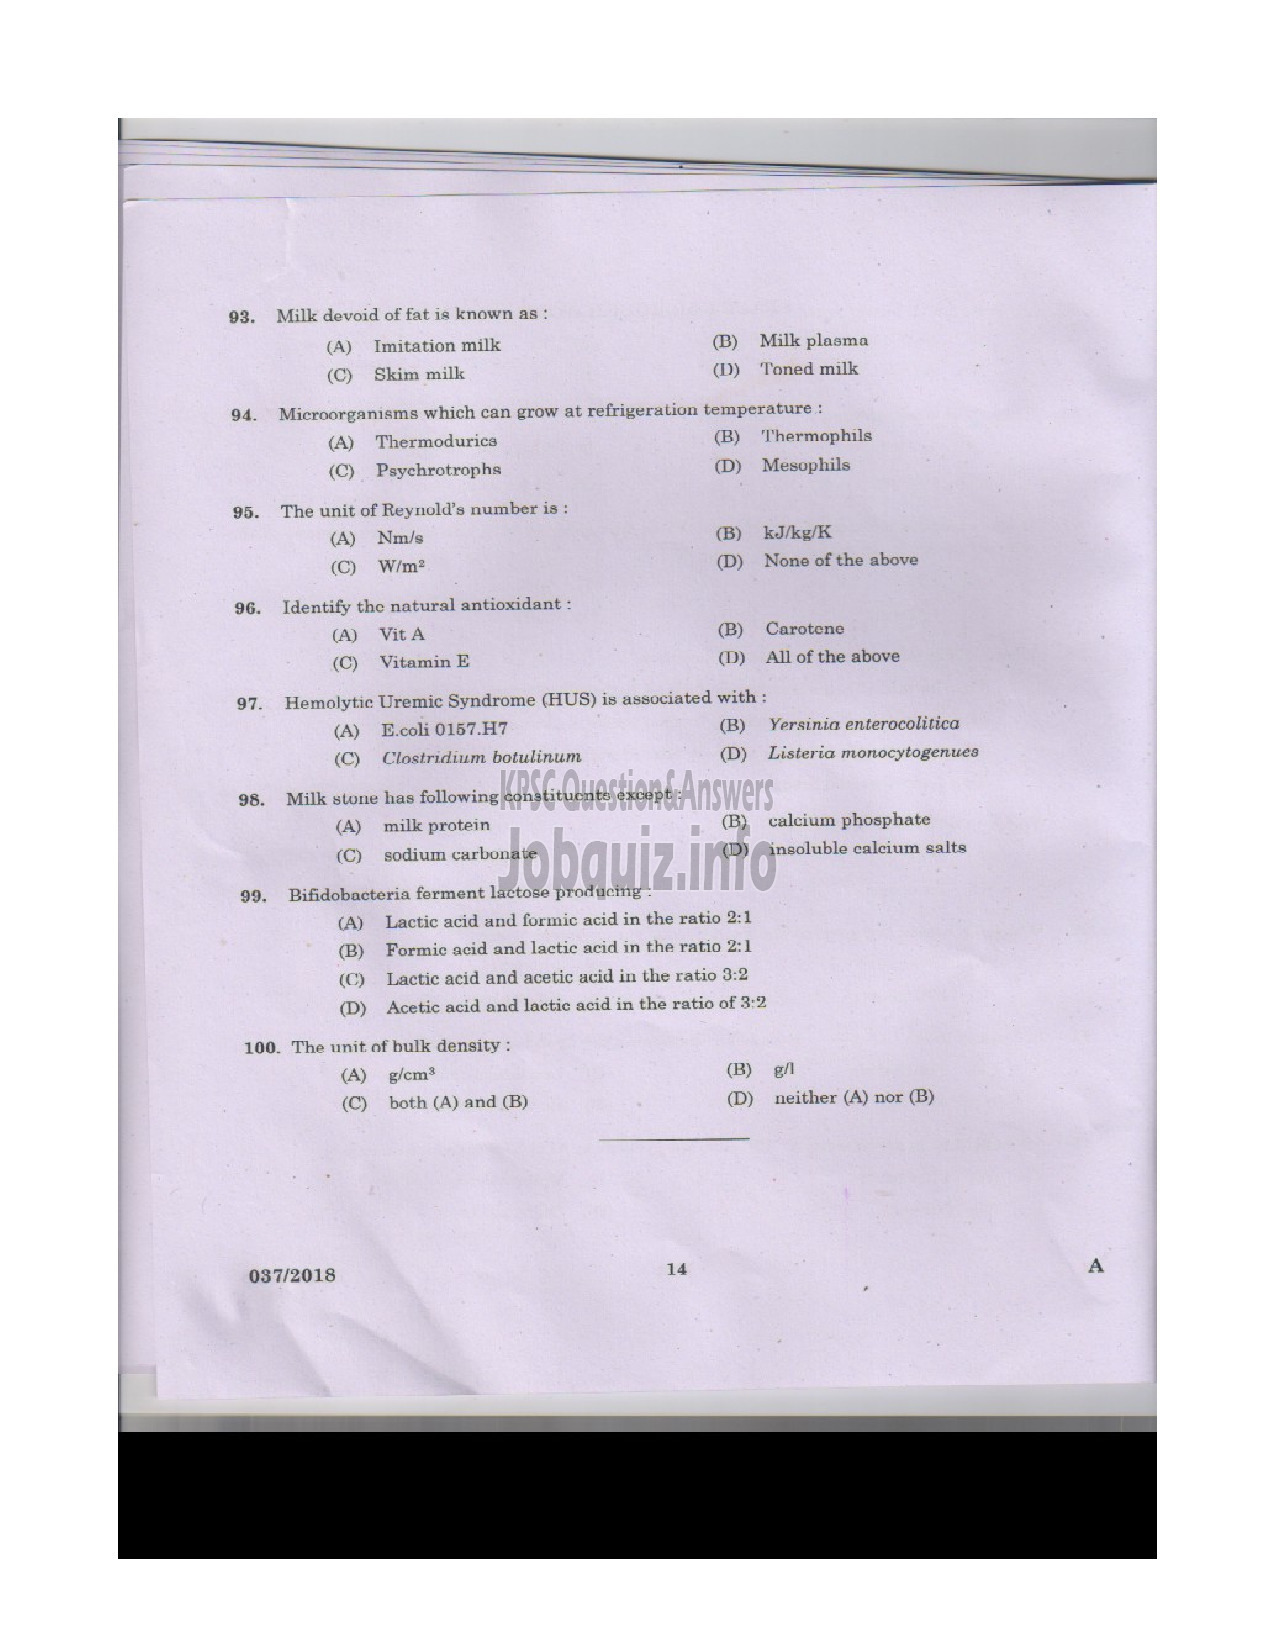 Kerala PSC Question Paper - VOCATIONAL INSTRUCTOR IN DAIRYING MILK PRODUCTS VHSE-13